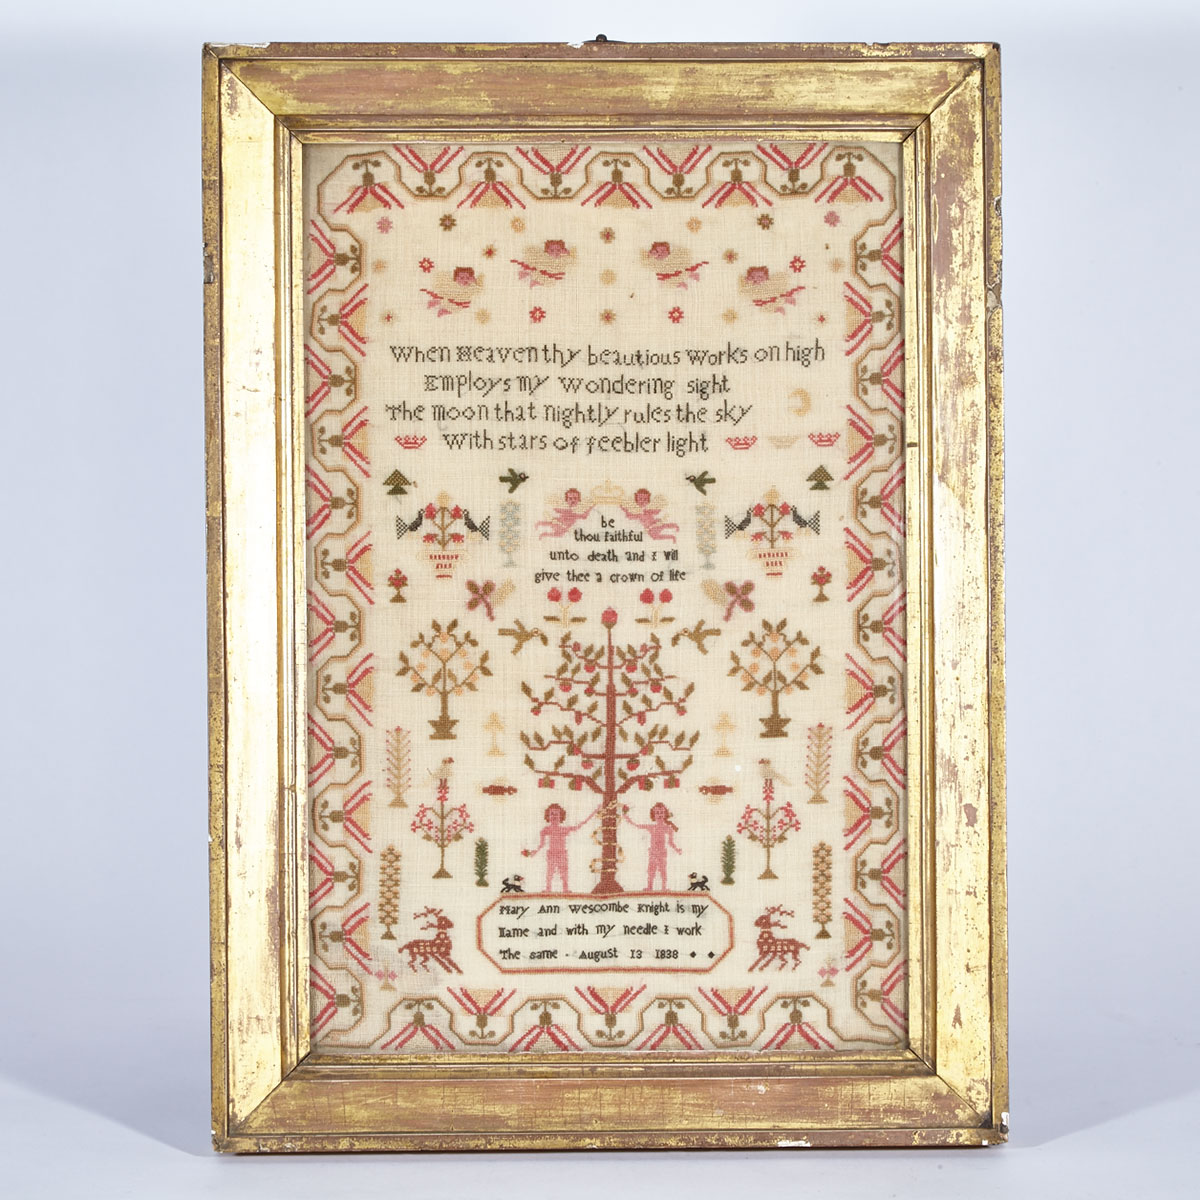 Adam and Eve Verse Sampler, Mary Ann Wescombe Knight, August 13, 1838